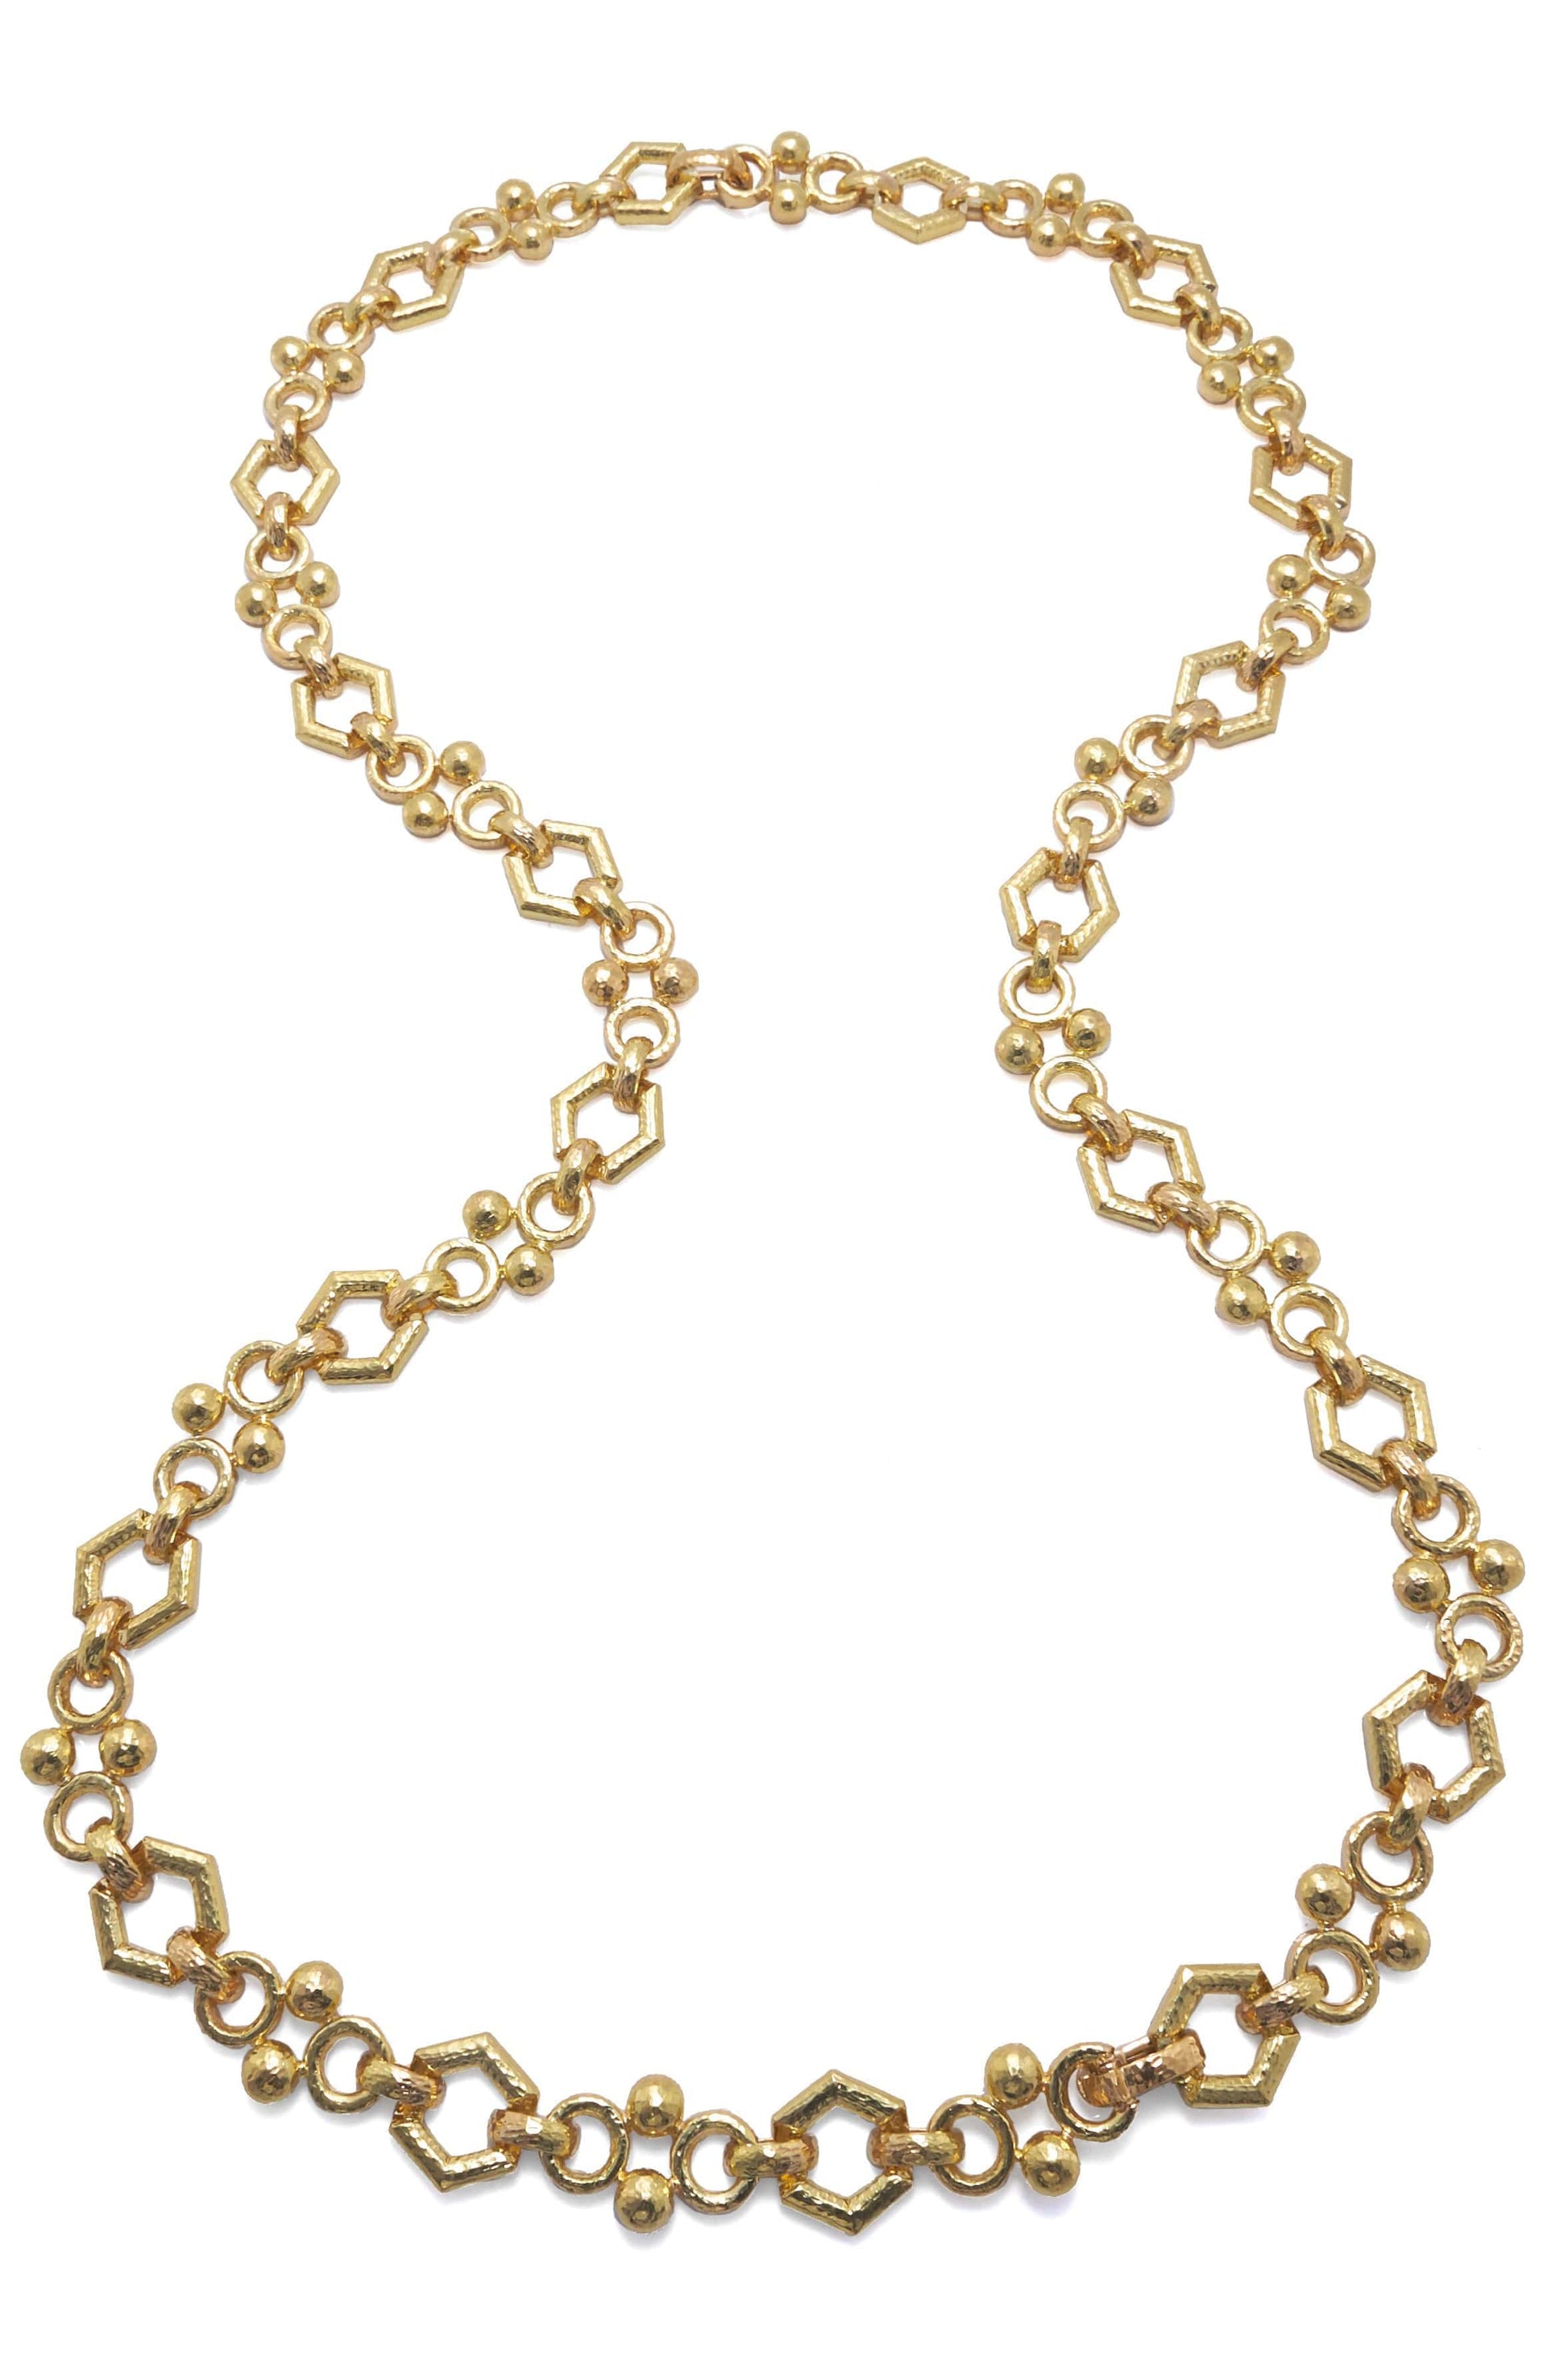 DAVID WEBB-Hexagonal and Round Link Chain Necklace-YELLOW GOLD